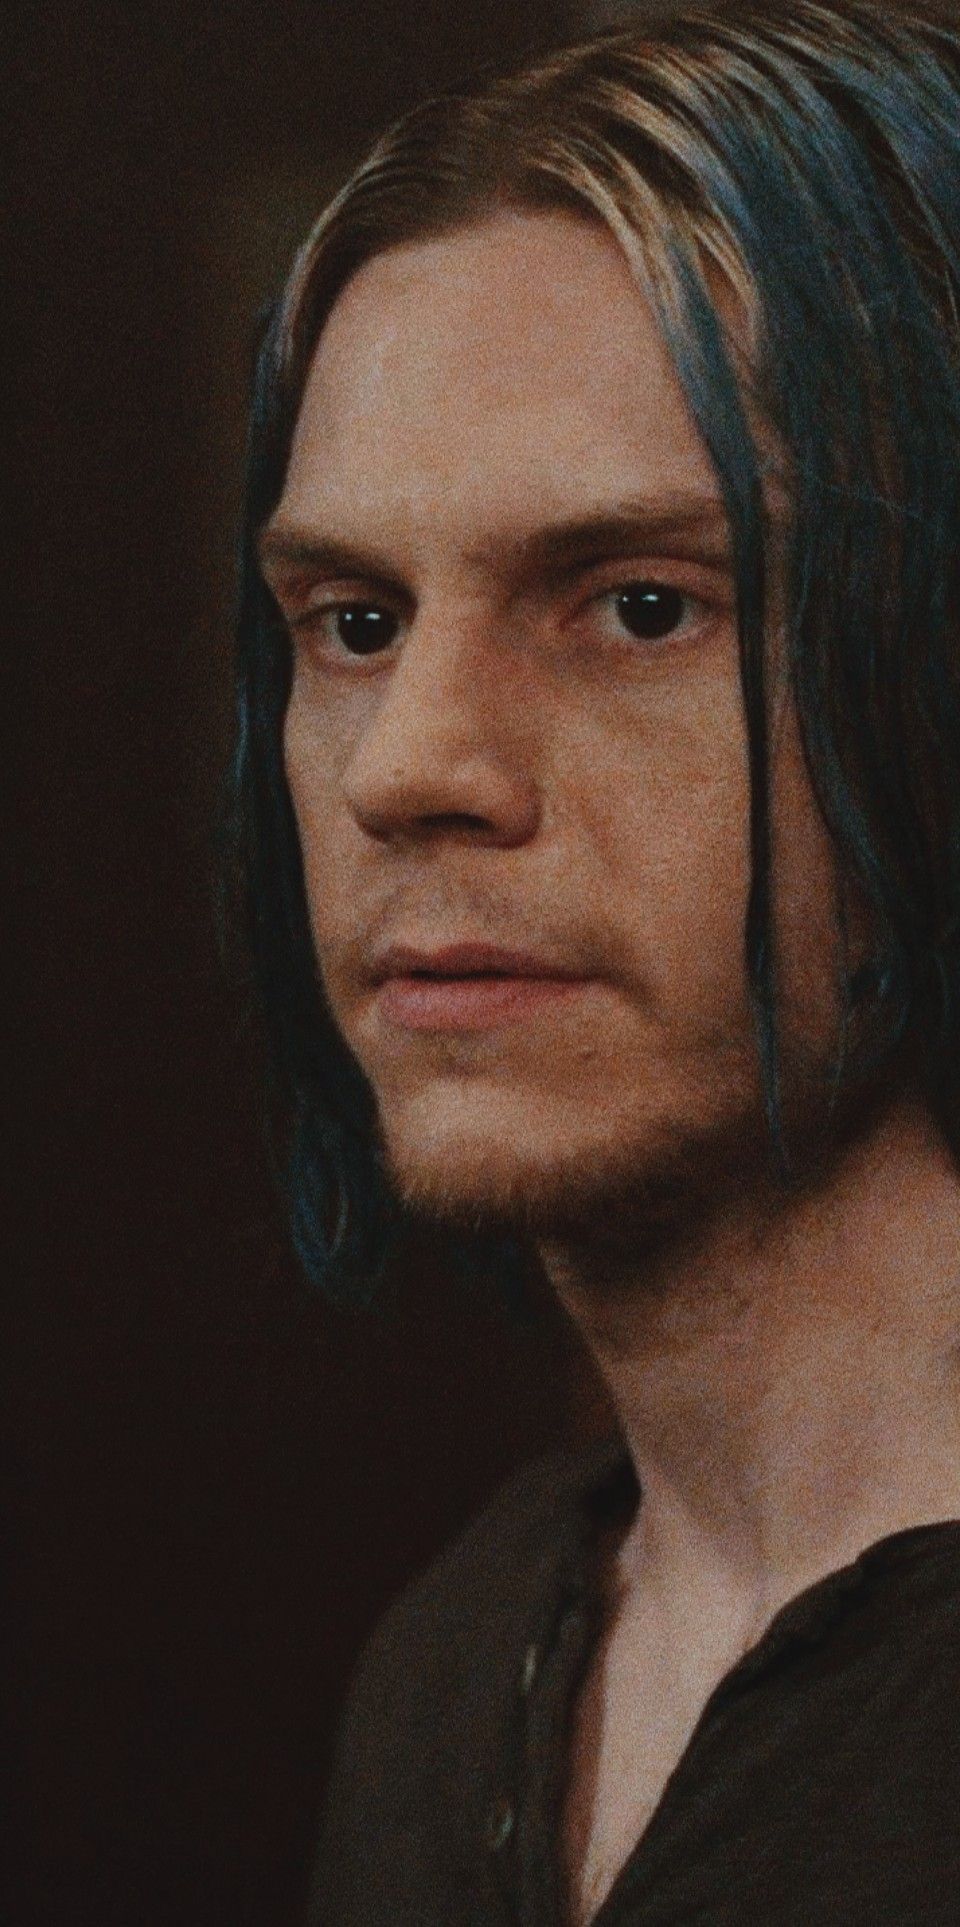 EVAN PETERS YOUNG エヴァンピーターズ エヴァン・ピーターズ イケメン